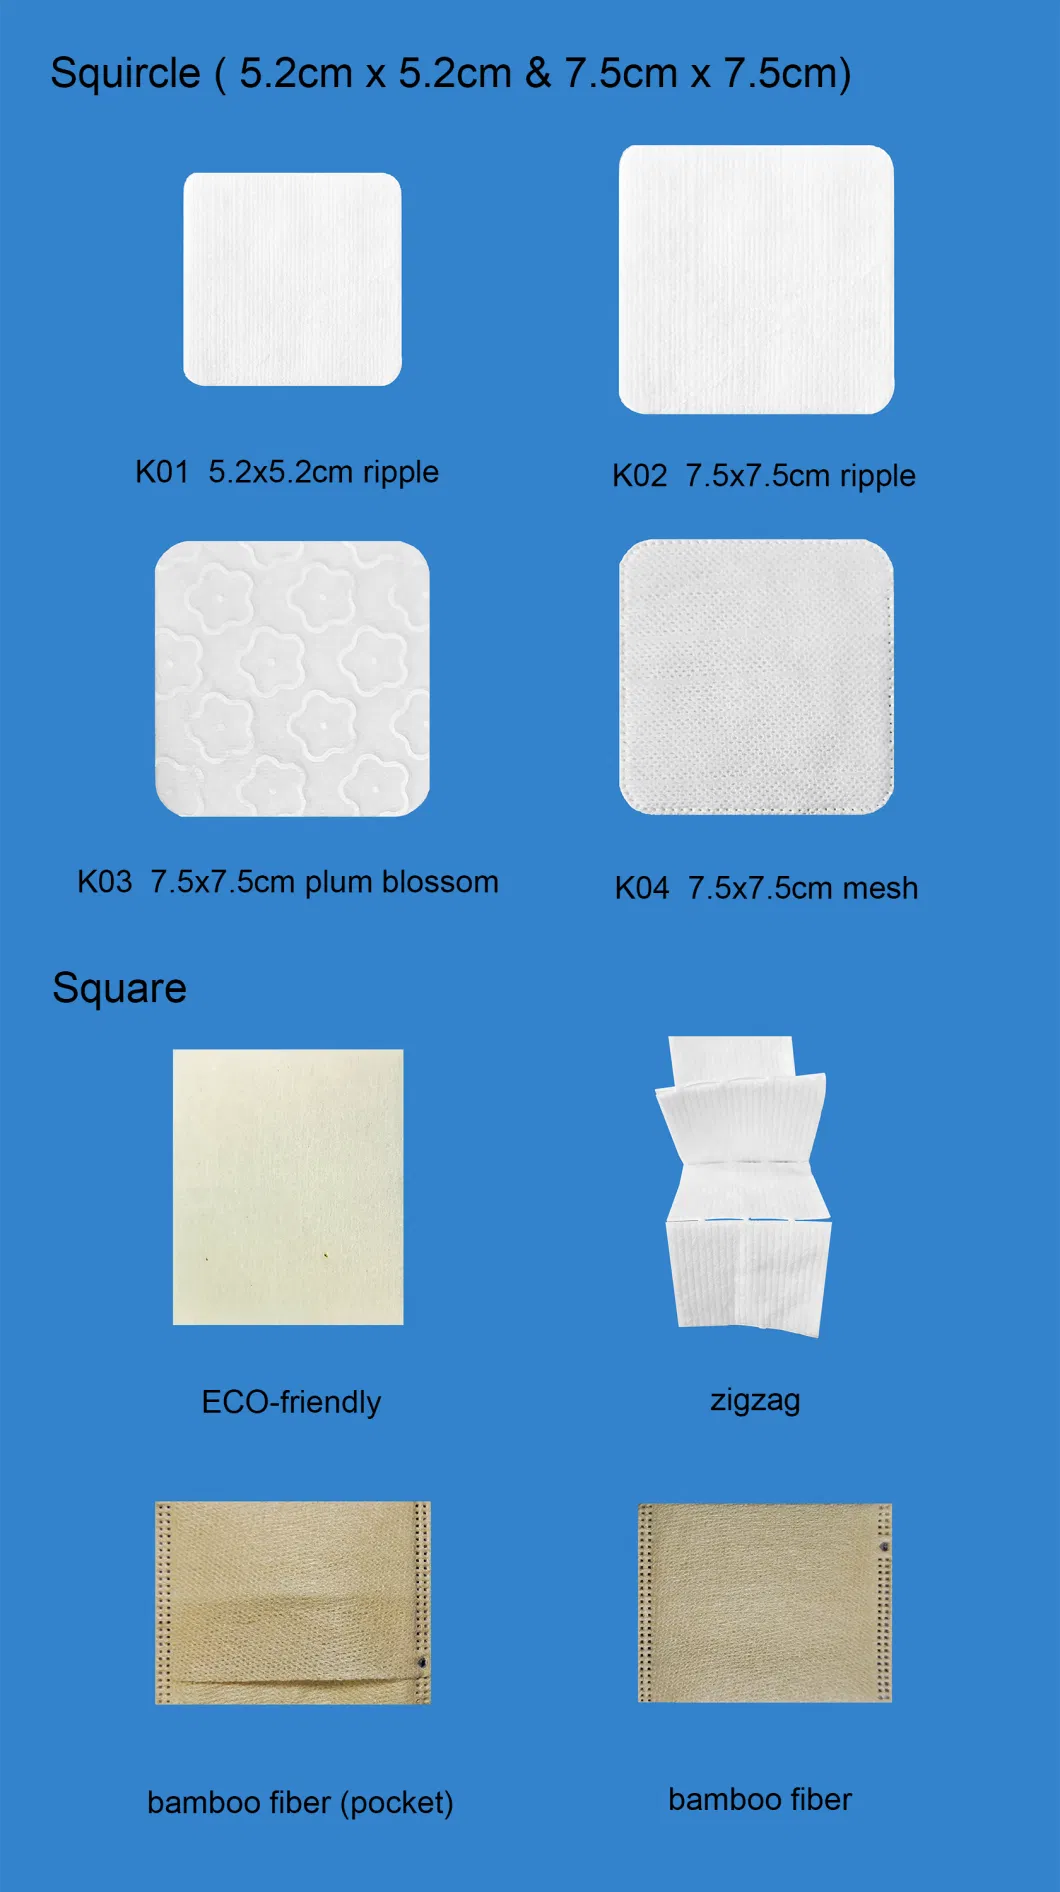 Premium Exfoliate Square Distinct Raised Textured Surface Super Soft Absorbent Hypoallergenic Lint Free Fluffy Durable Biodegradable and Disposable Cotton Pad